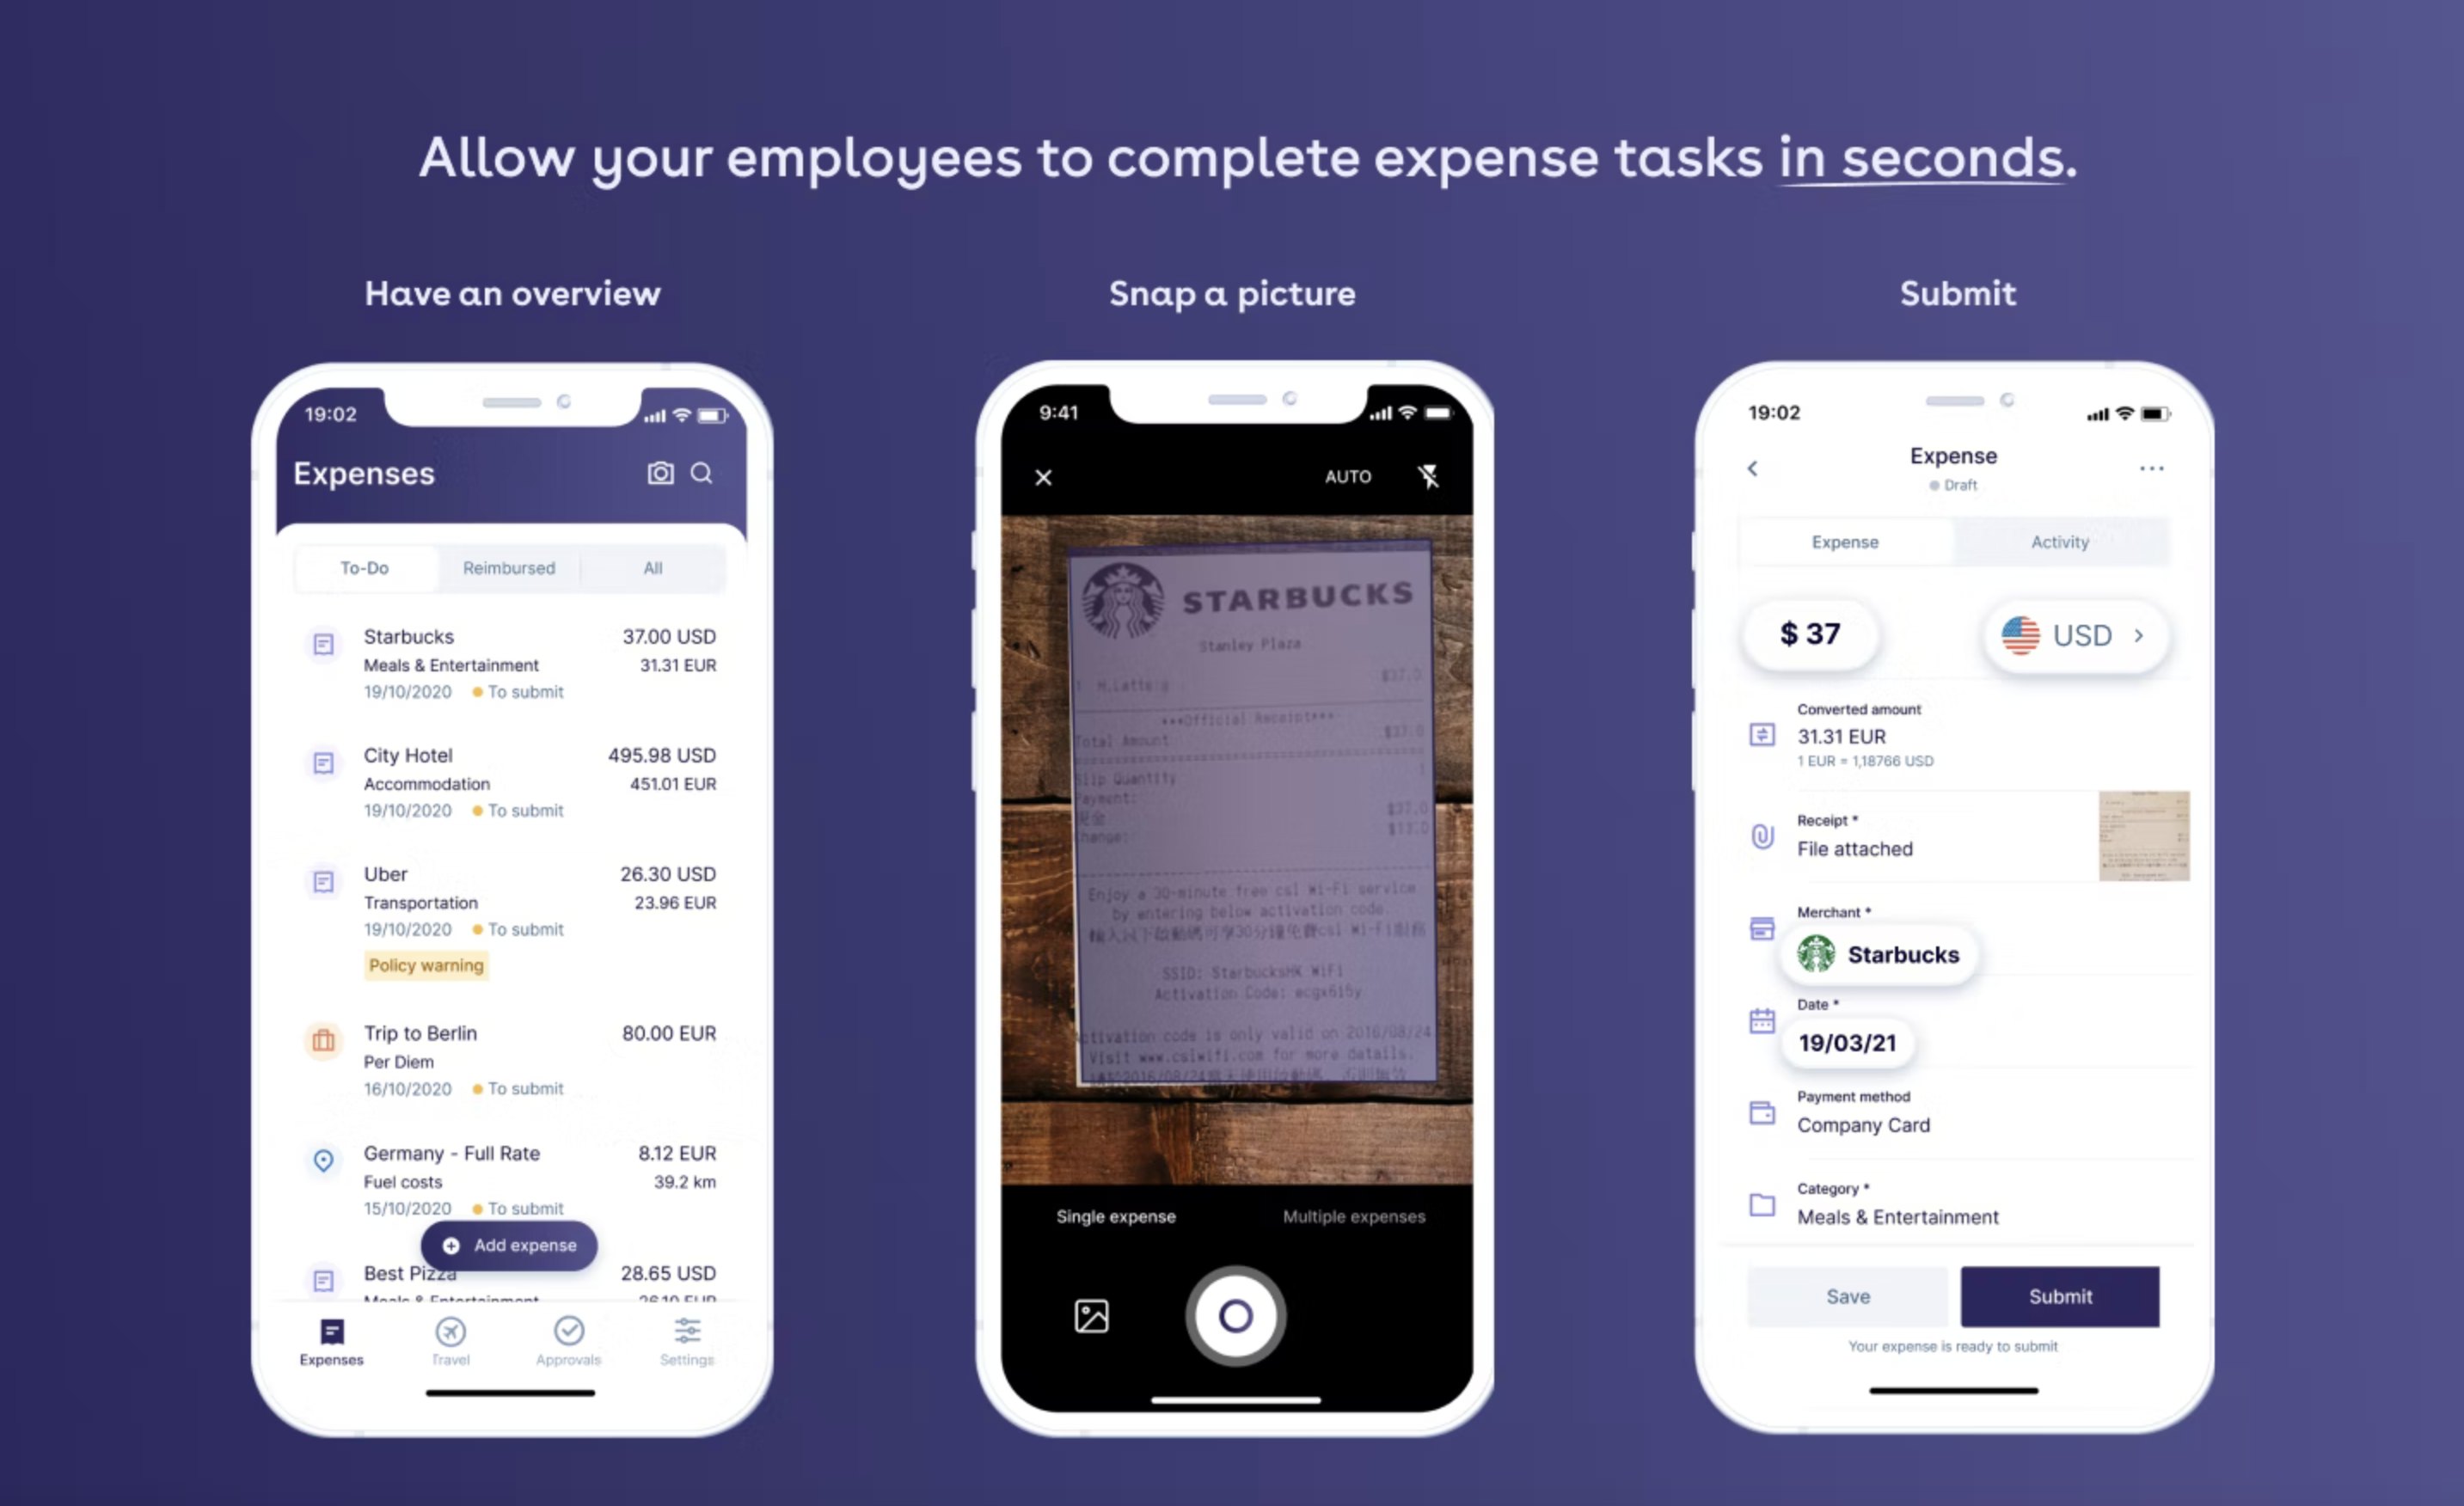 Allow your employees to complete tasks in seconds